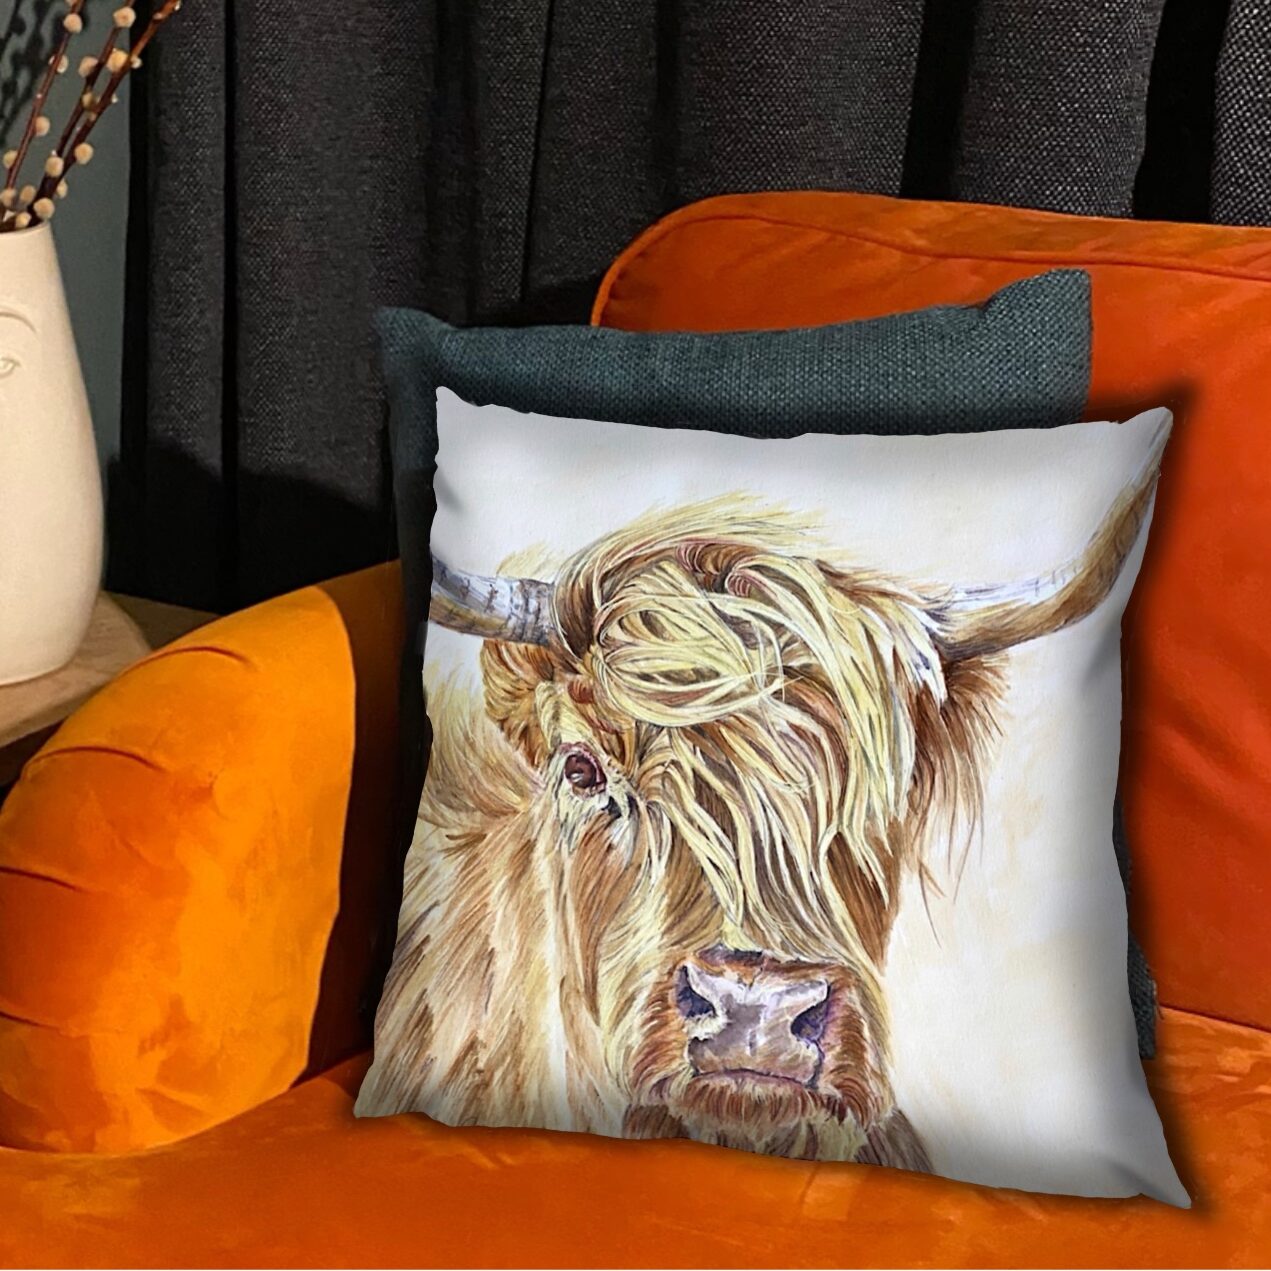 Blonde highland cow on a white background printed onto a velvet cushion